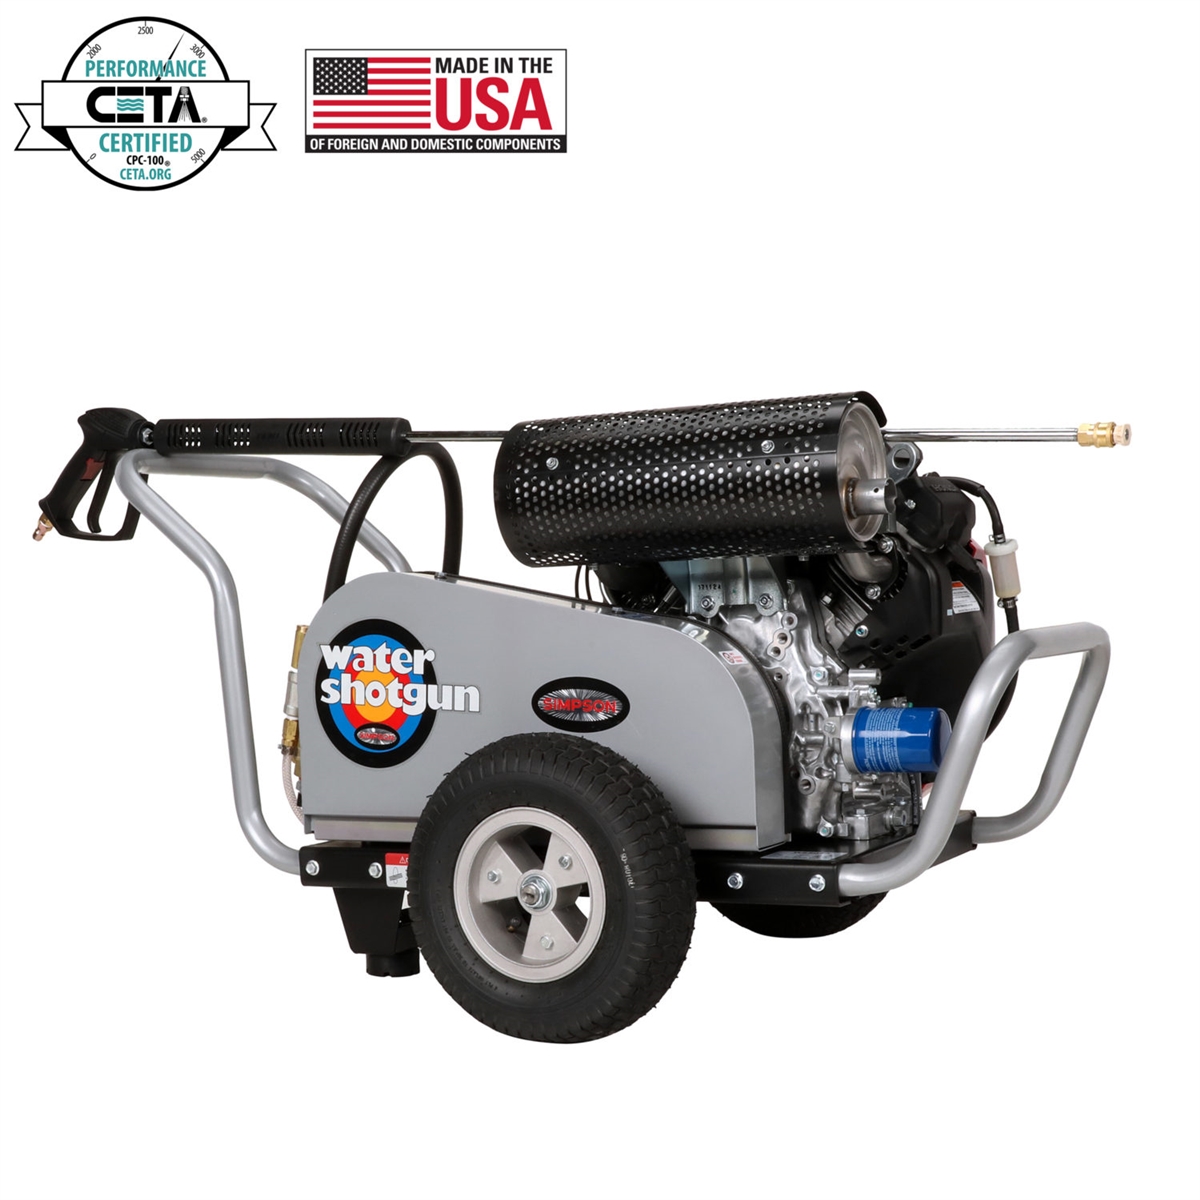 Simpson SuperPro Roll-Cage 3600 PSI 2.5 GPM GAS Cold Water Pressure Washer with Honda GX200 Engine